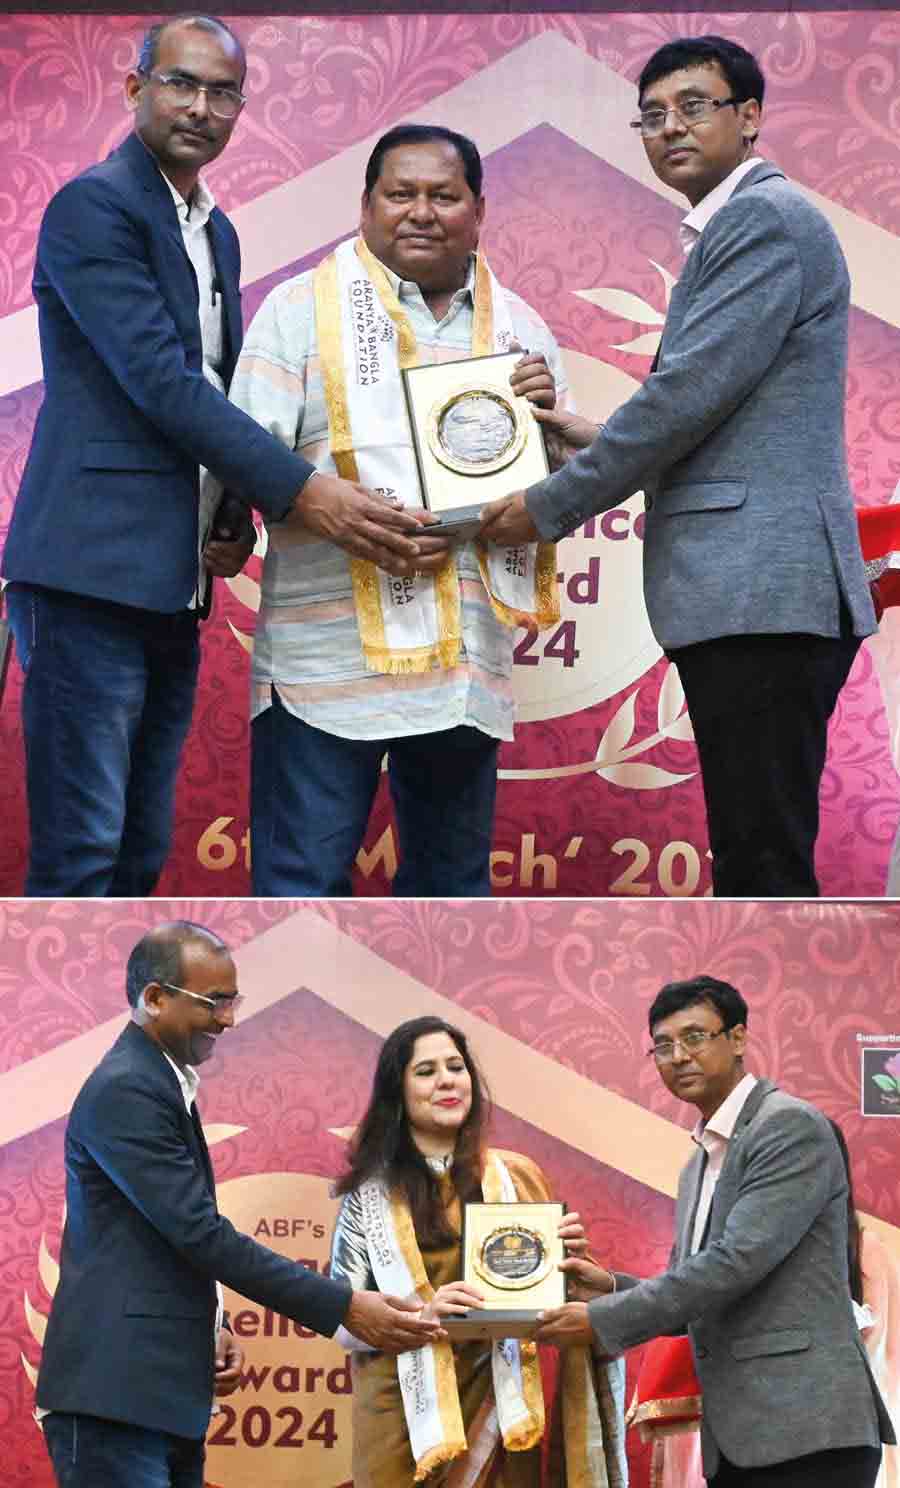 Actor Kharaj Mukherjee and Dr Saira Halim were felicitated as they won the Aranya Bangla Foundation (ABF)’s Bengal Excellence Award at Science City Seminar Hall. ABF is a non-profitable organisation carrying out various social service activities